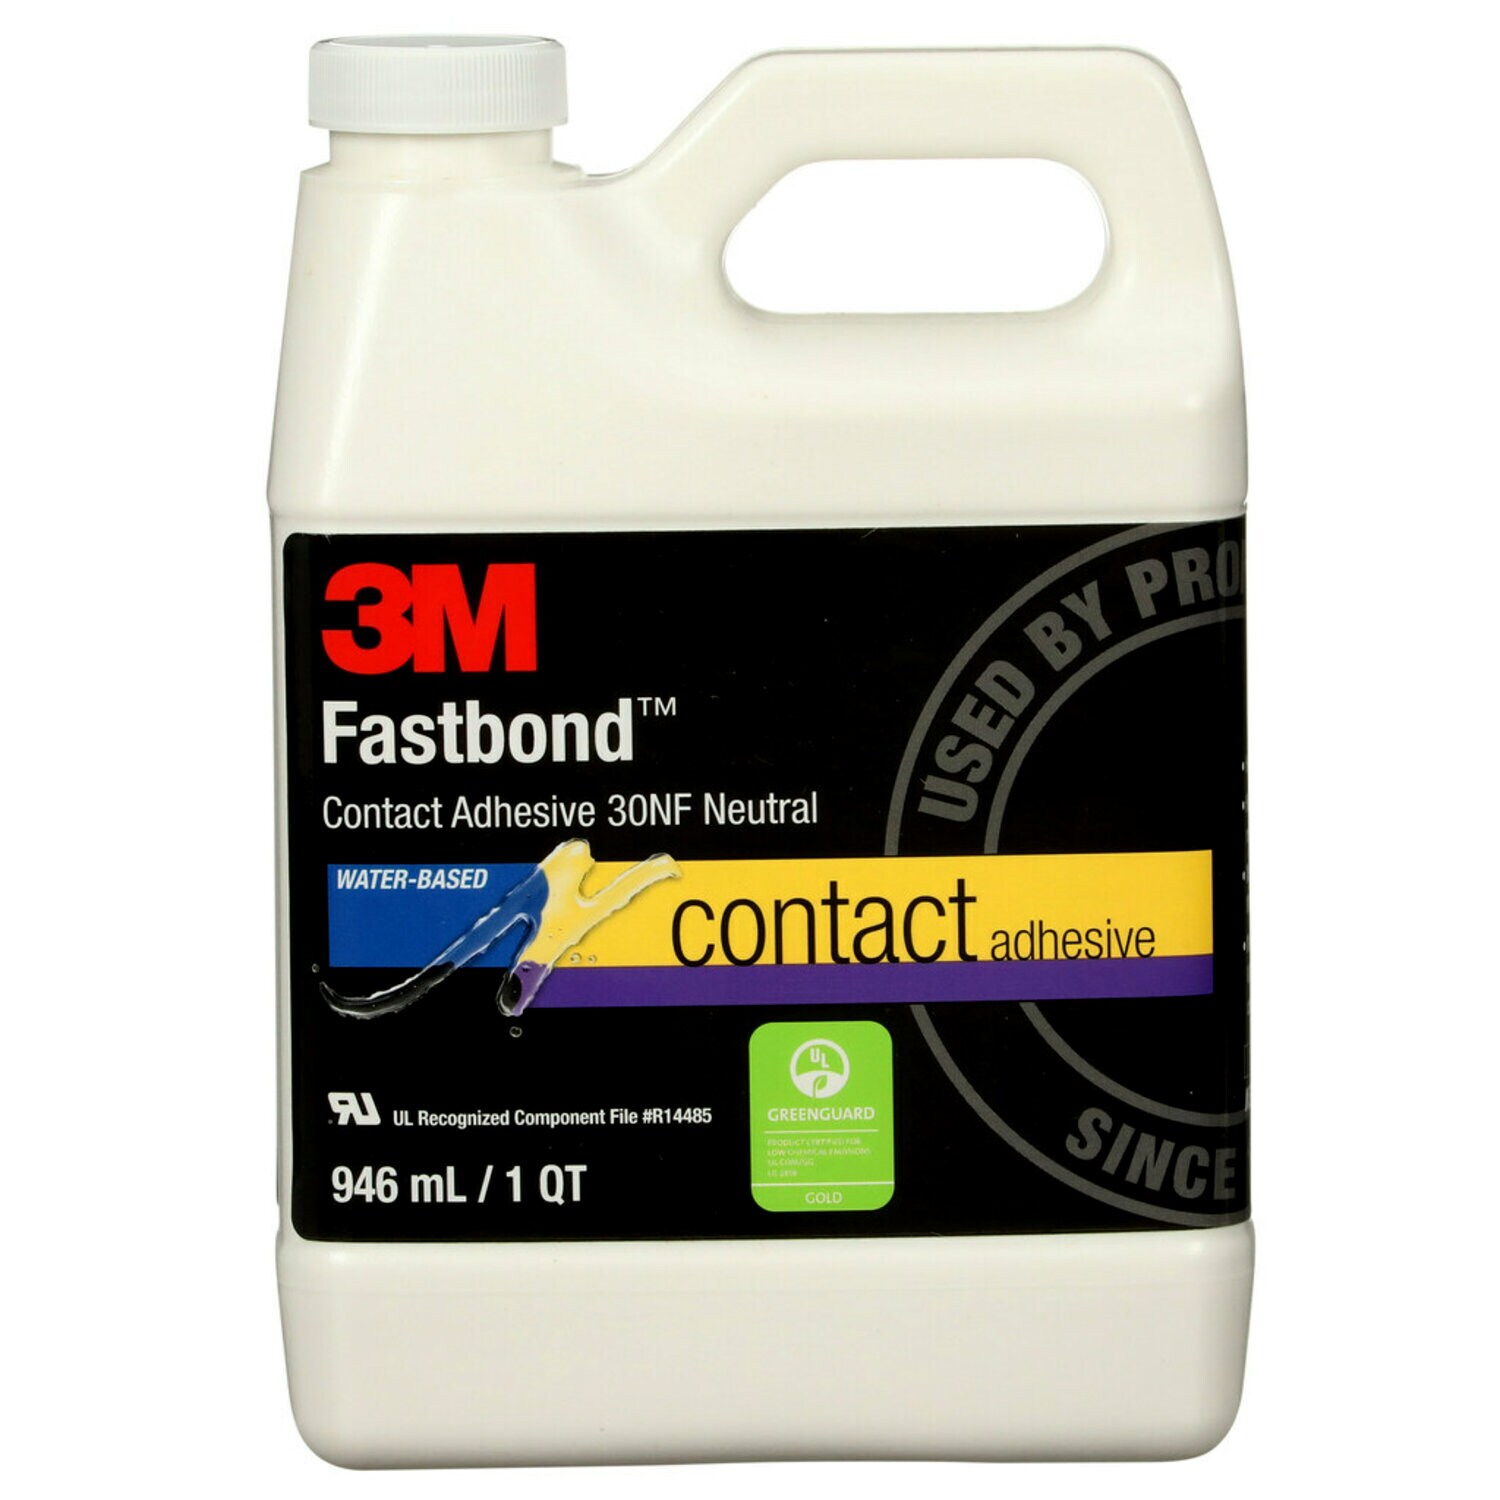 7000046567 - 3M Fastbond Contact Adhesive 30NF, Neutral, 1 Quart Can, 12/case